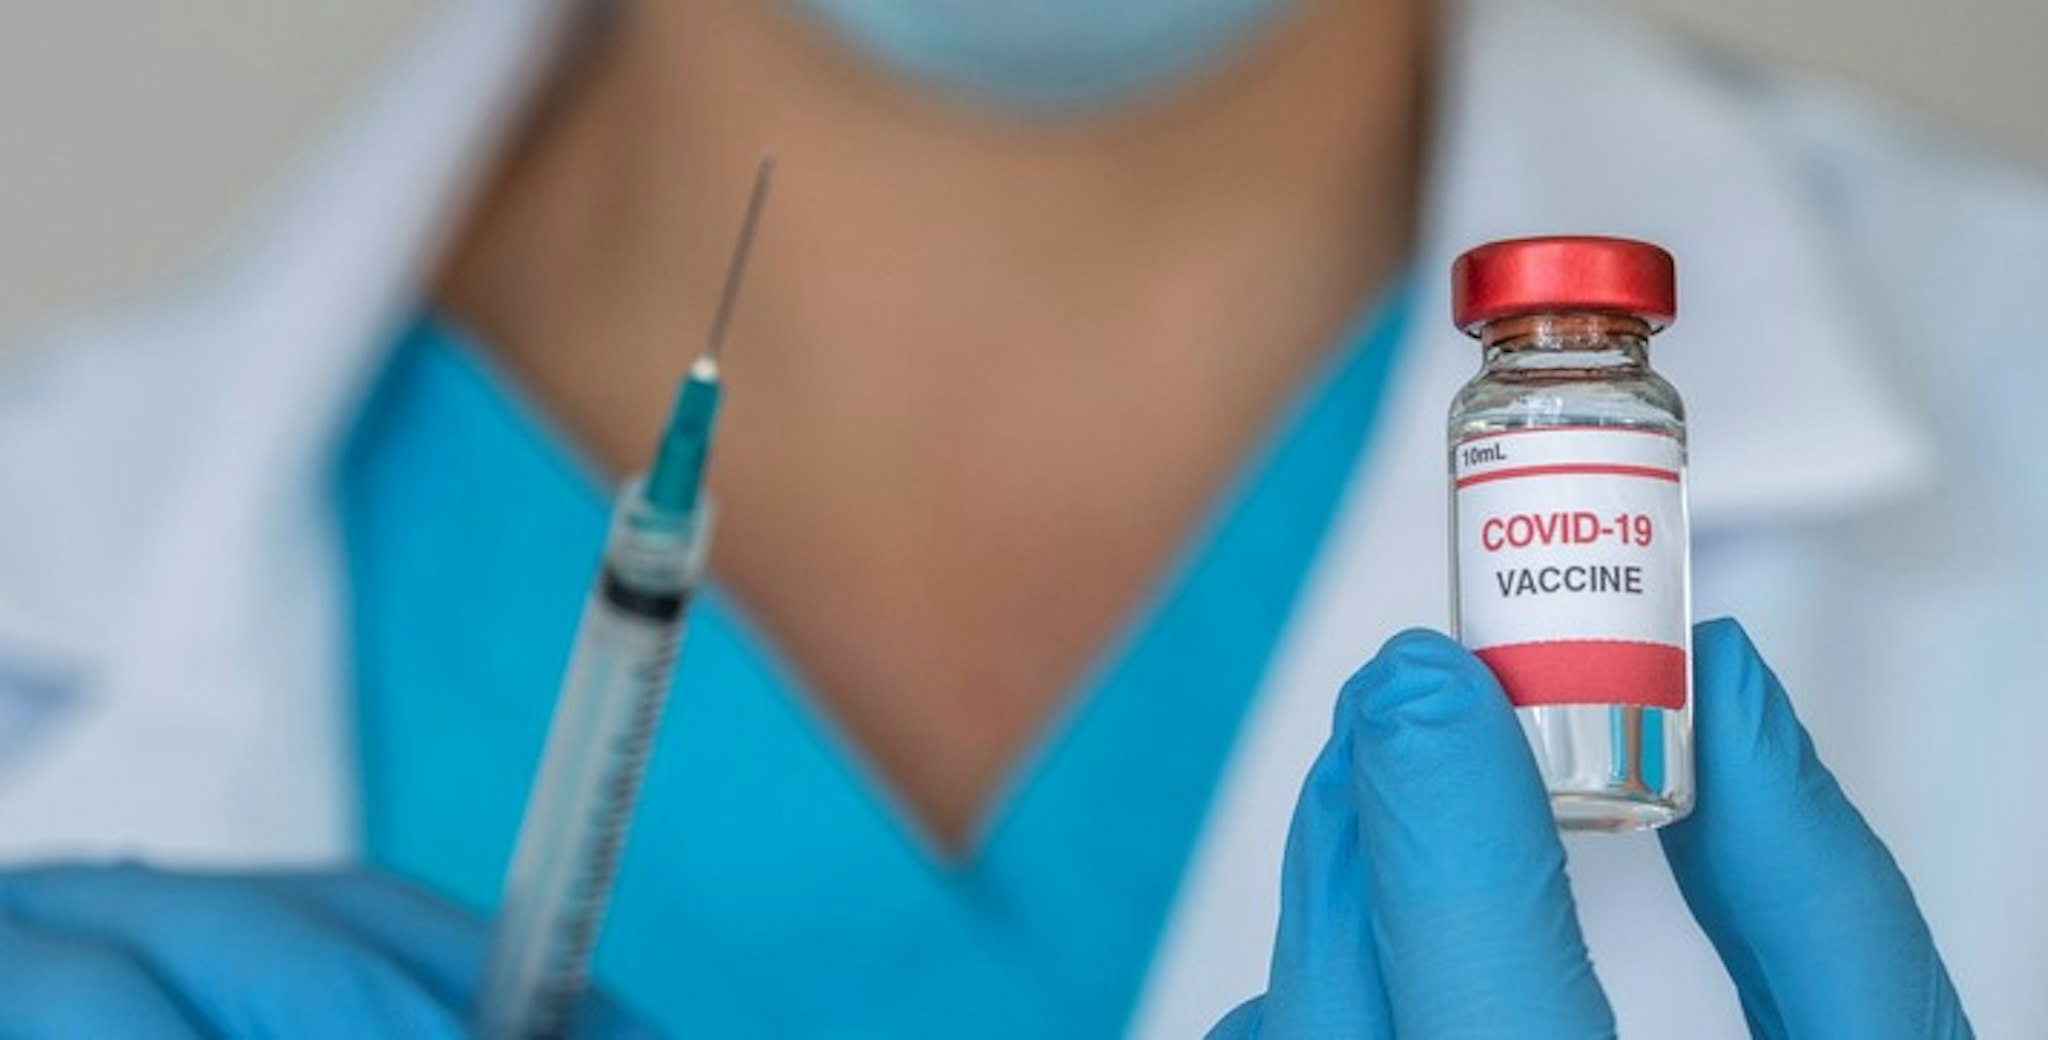 Close-up of doctors hands holding Covid-19 vaccine and syringe